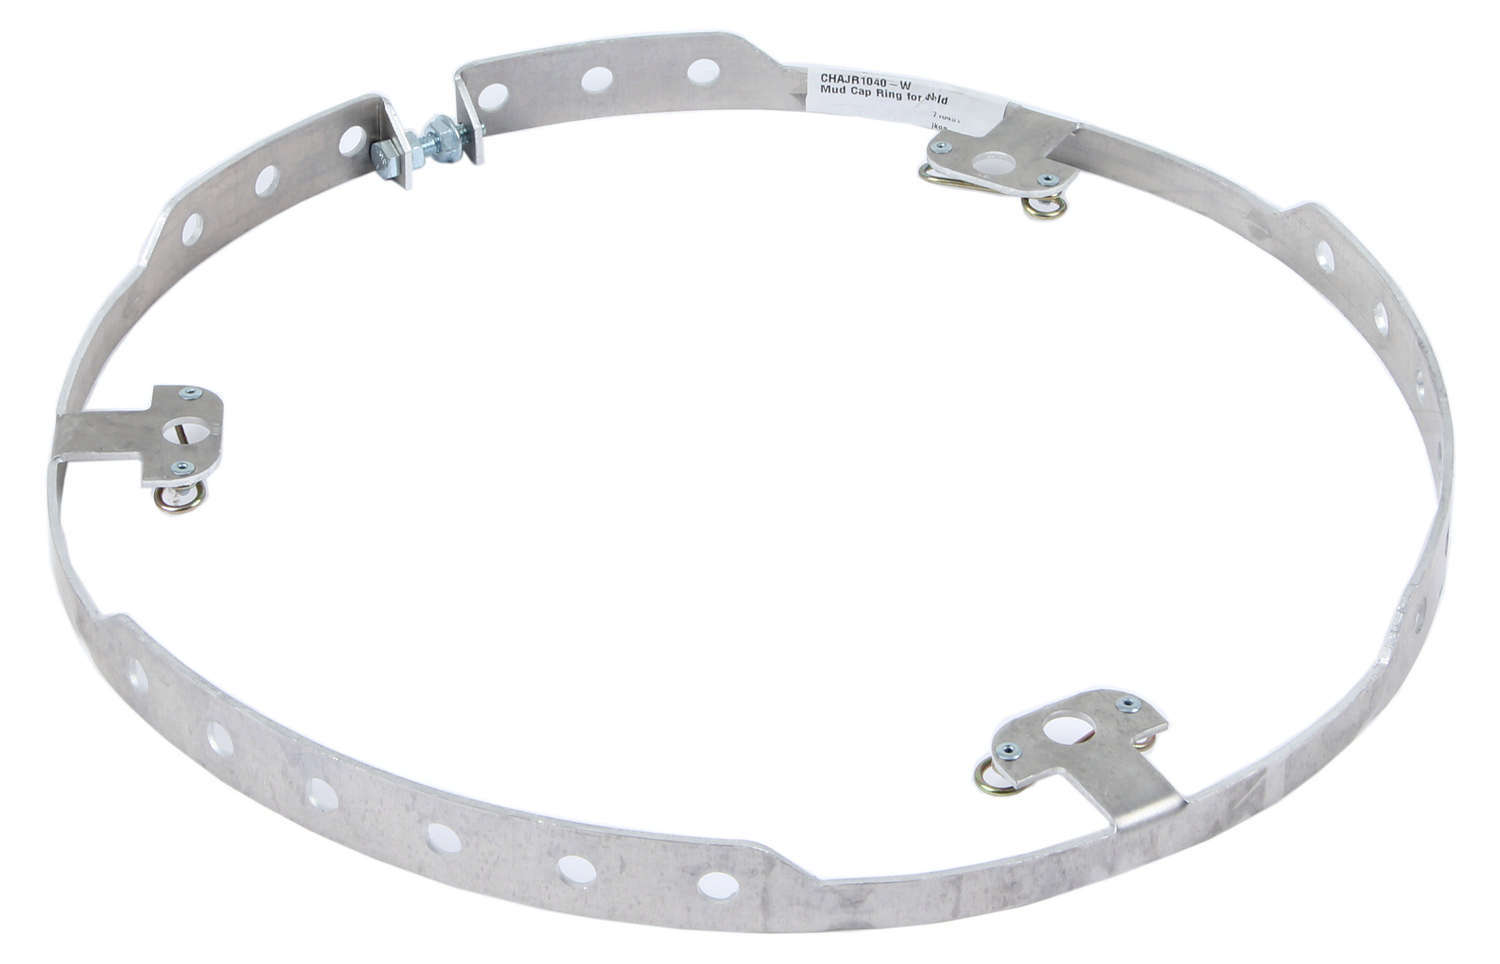 Champ Pans JR1040-W Mud Cover Ring, Expander Mounting Ring, 3 Quick Release Fasteners, Steel, Each